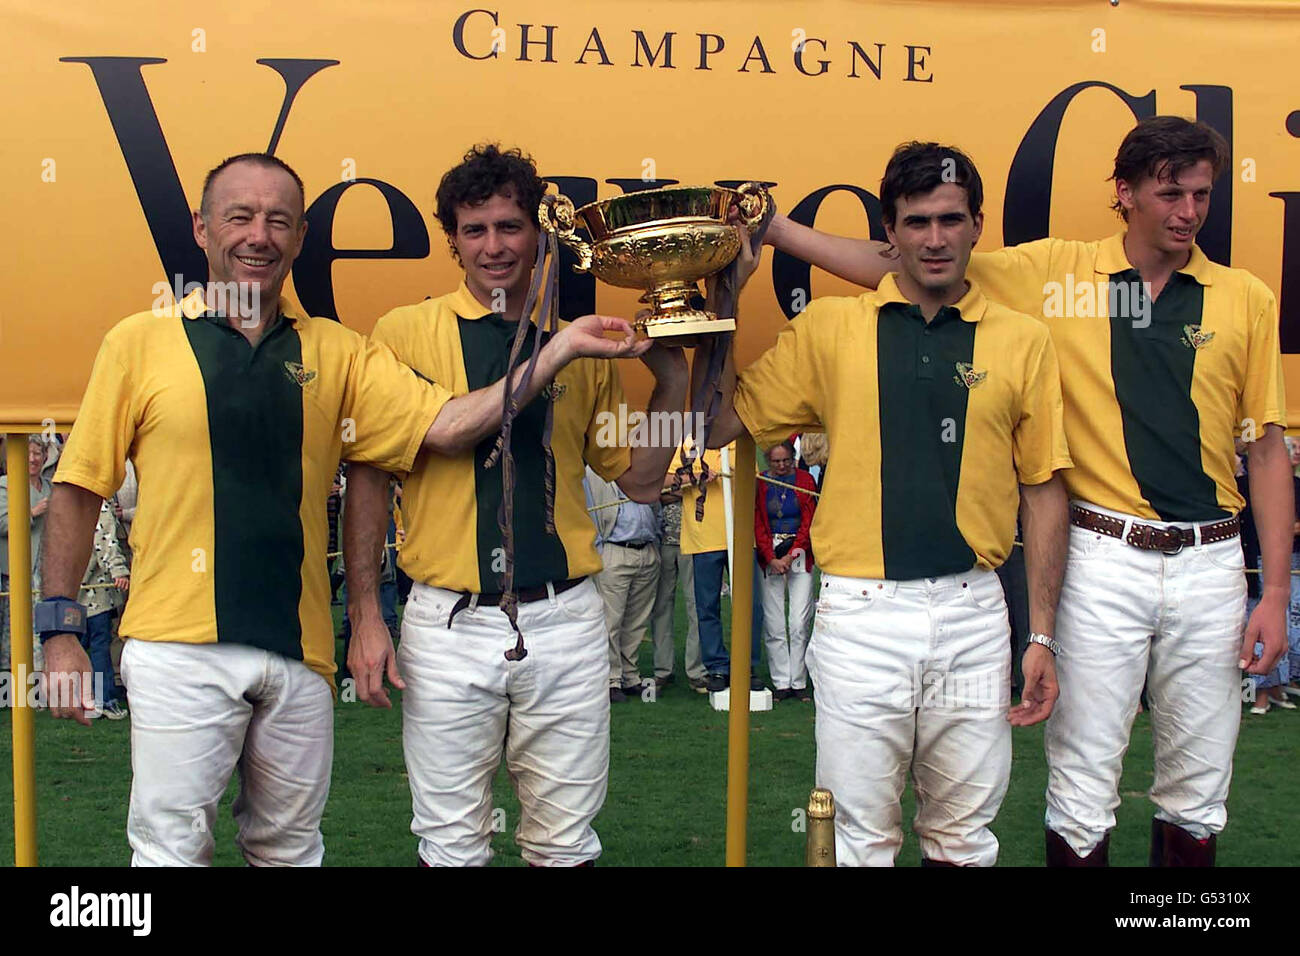 Geebung celebrate winning the Veuve Clicquot Gold Cup polo at Cowdray Park, near Midhurst, West Sussex. Geebung beat the Black Bears 13:8. Left to right Rick Stowe, Adolfo Cambiaso, Bautusta Heguy, Dave Allen. Stock Photo